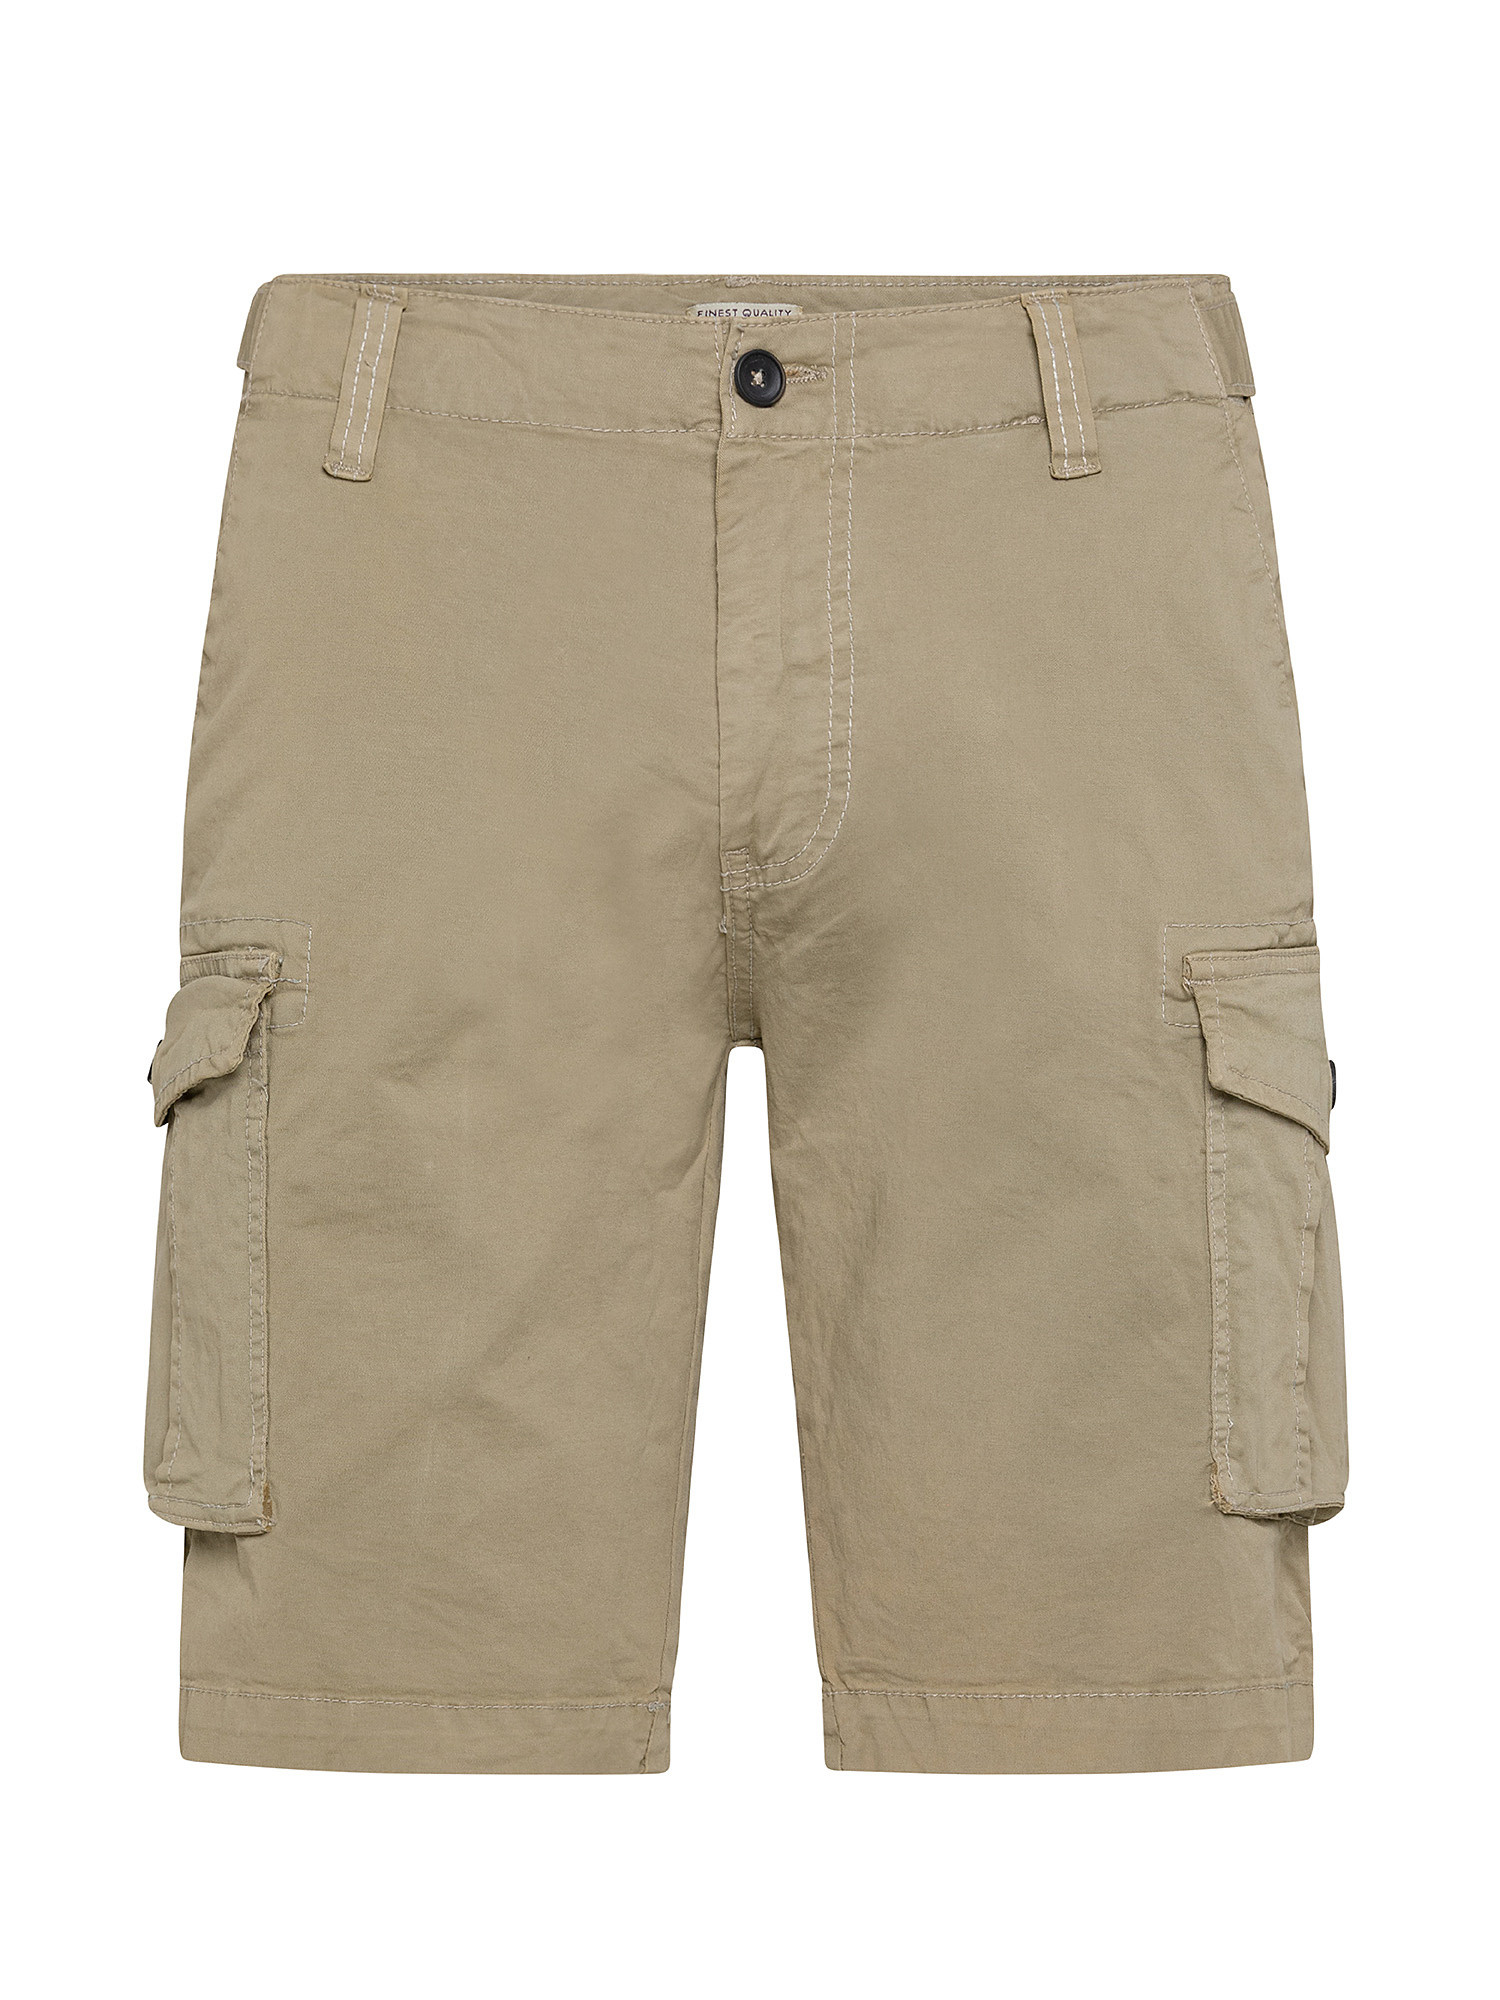 Stretch cotton cargo bermuda shorts with large pockets, Beige, large image number 0